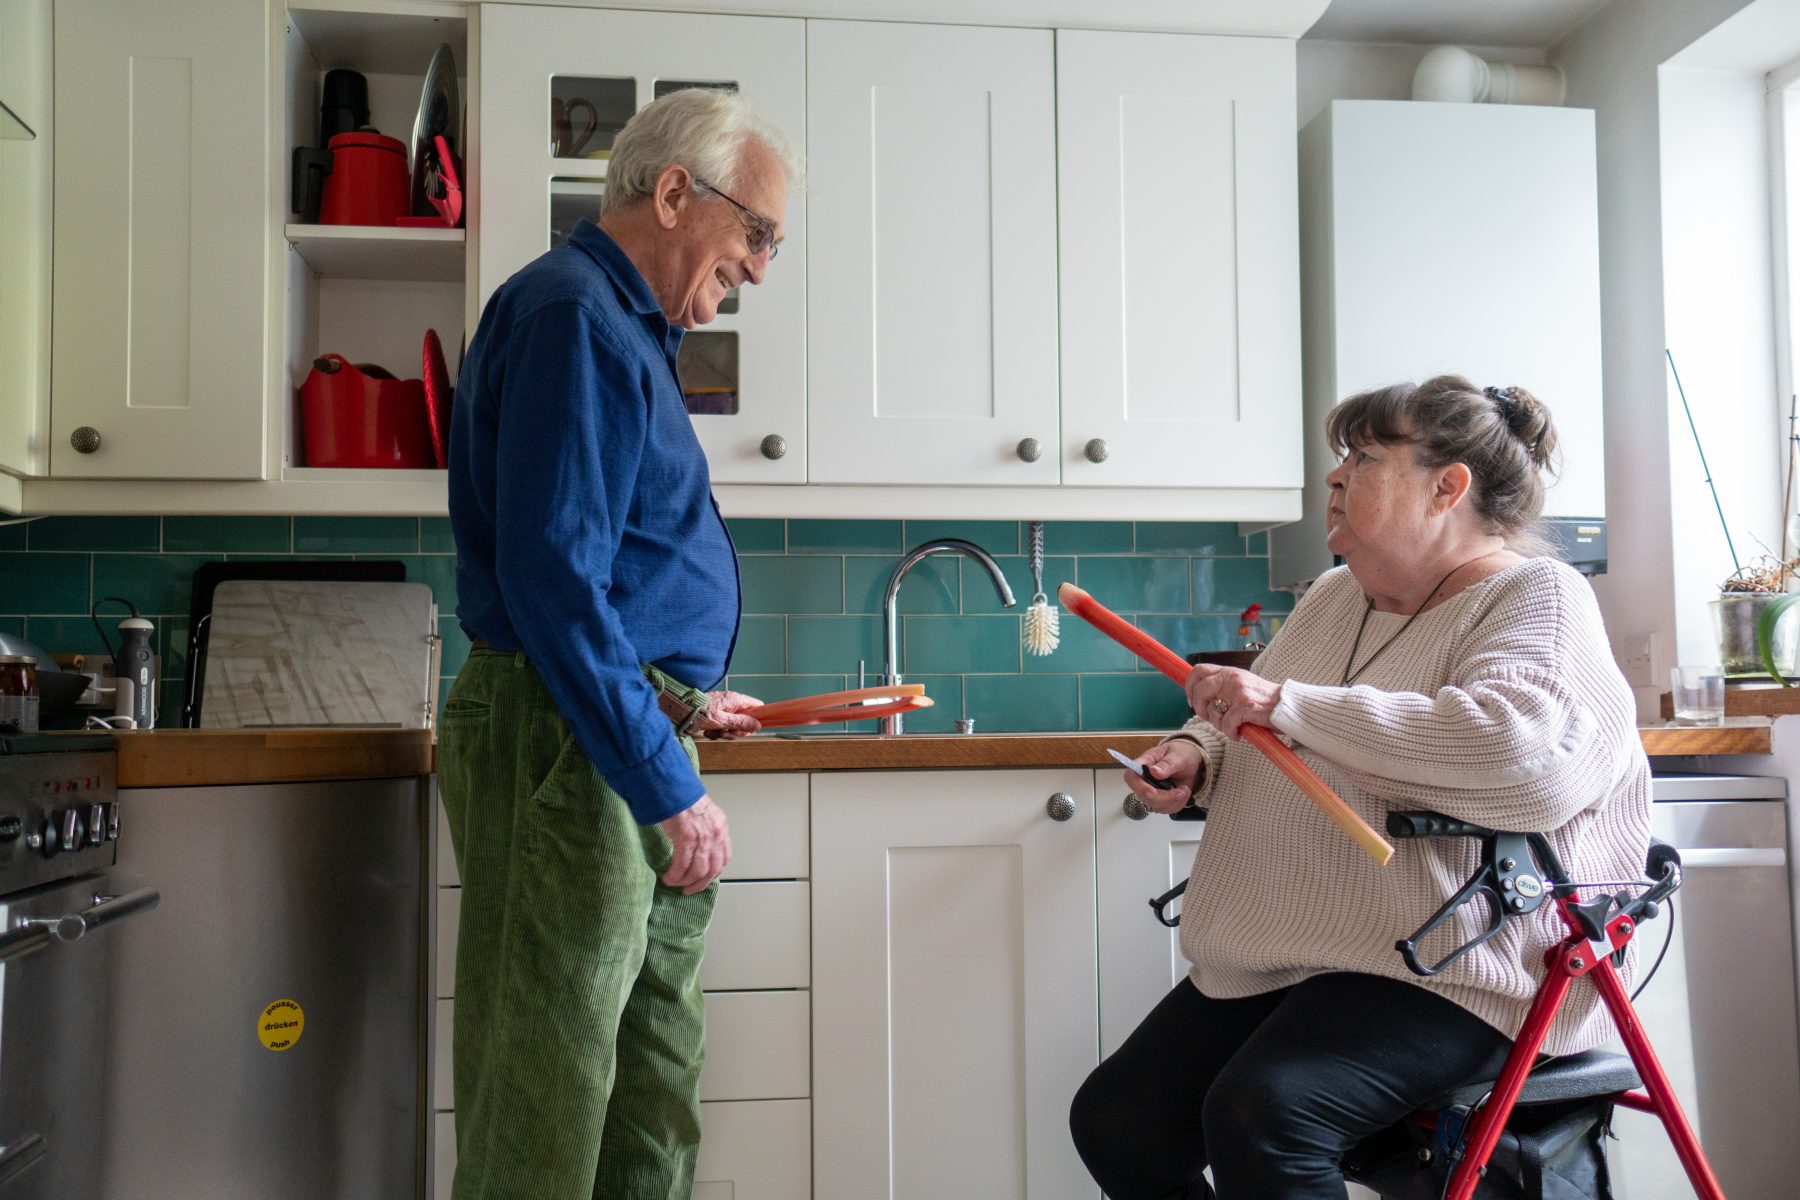 Older couple preparing a meal in the kitchen